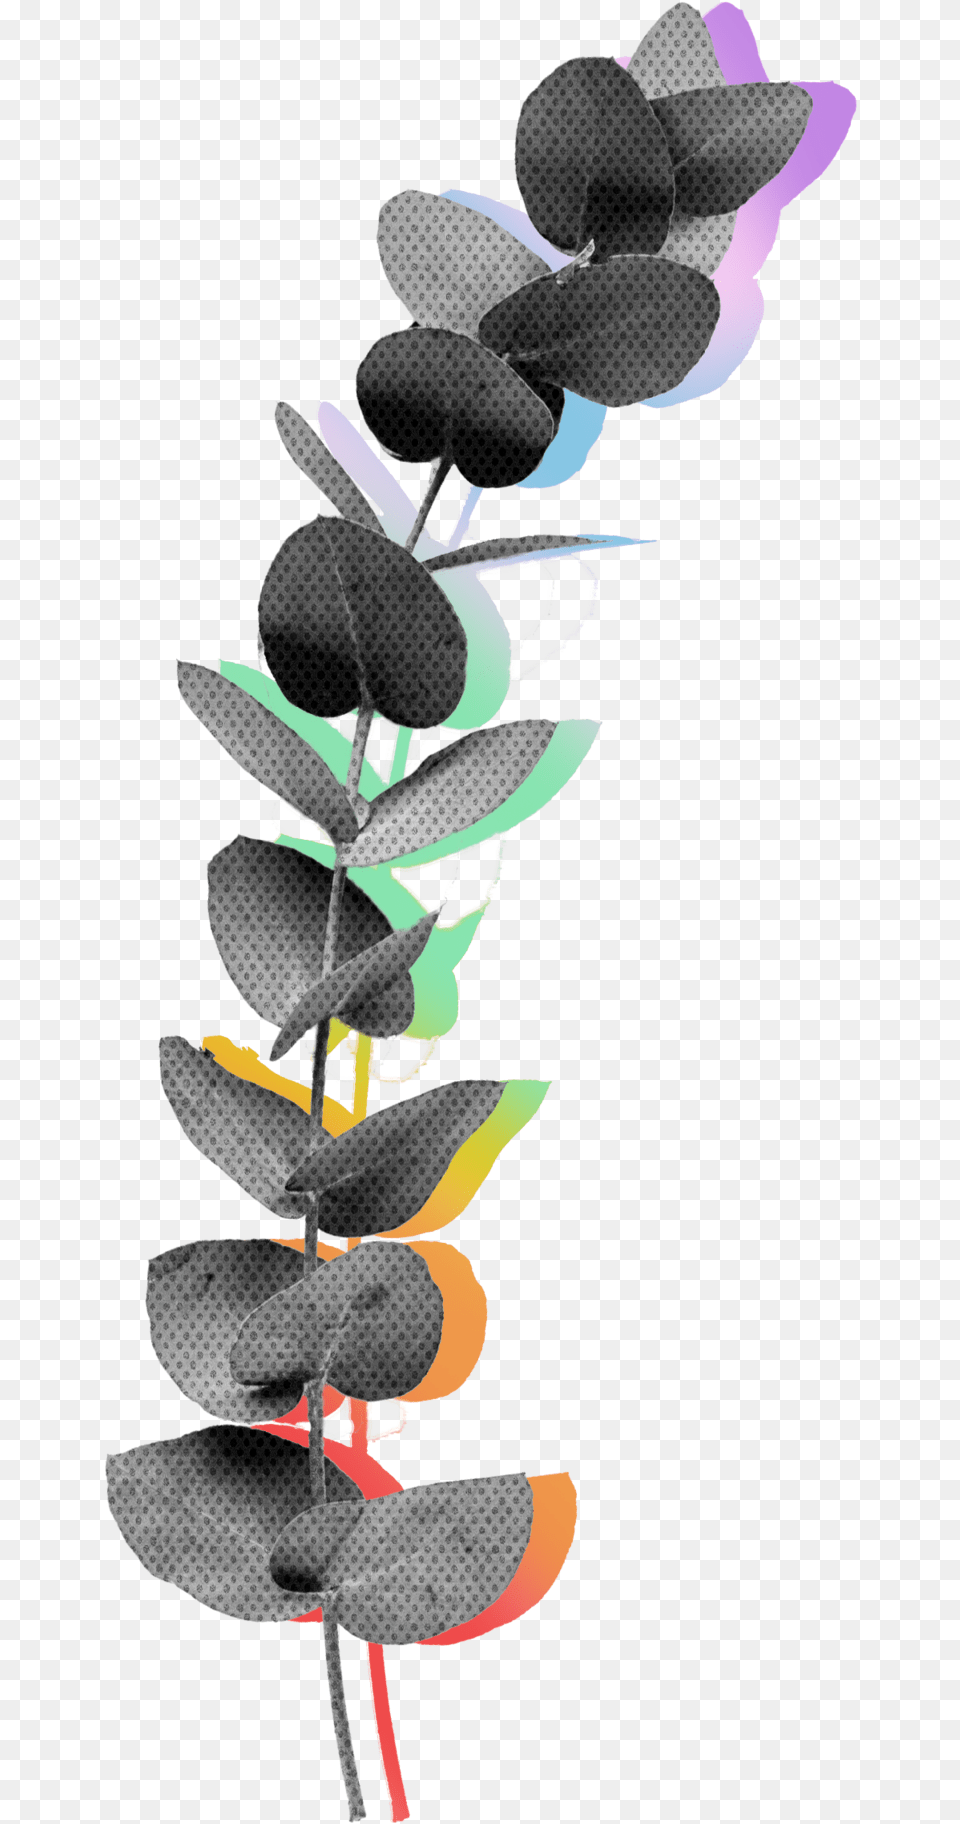 What Sets The Eucalyptus Apart Is That It39s A Tree, Art, Graphics, Light, Traffic Light Png Image